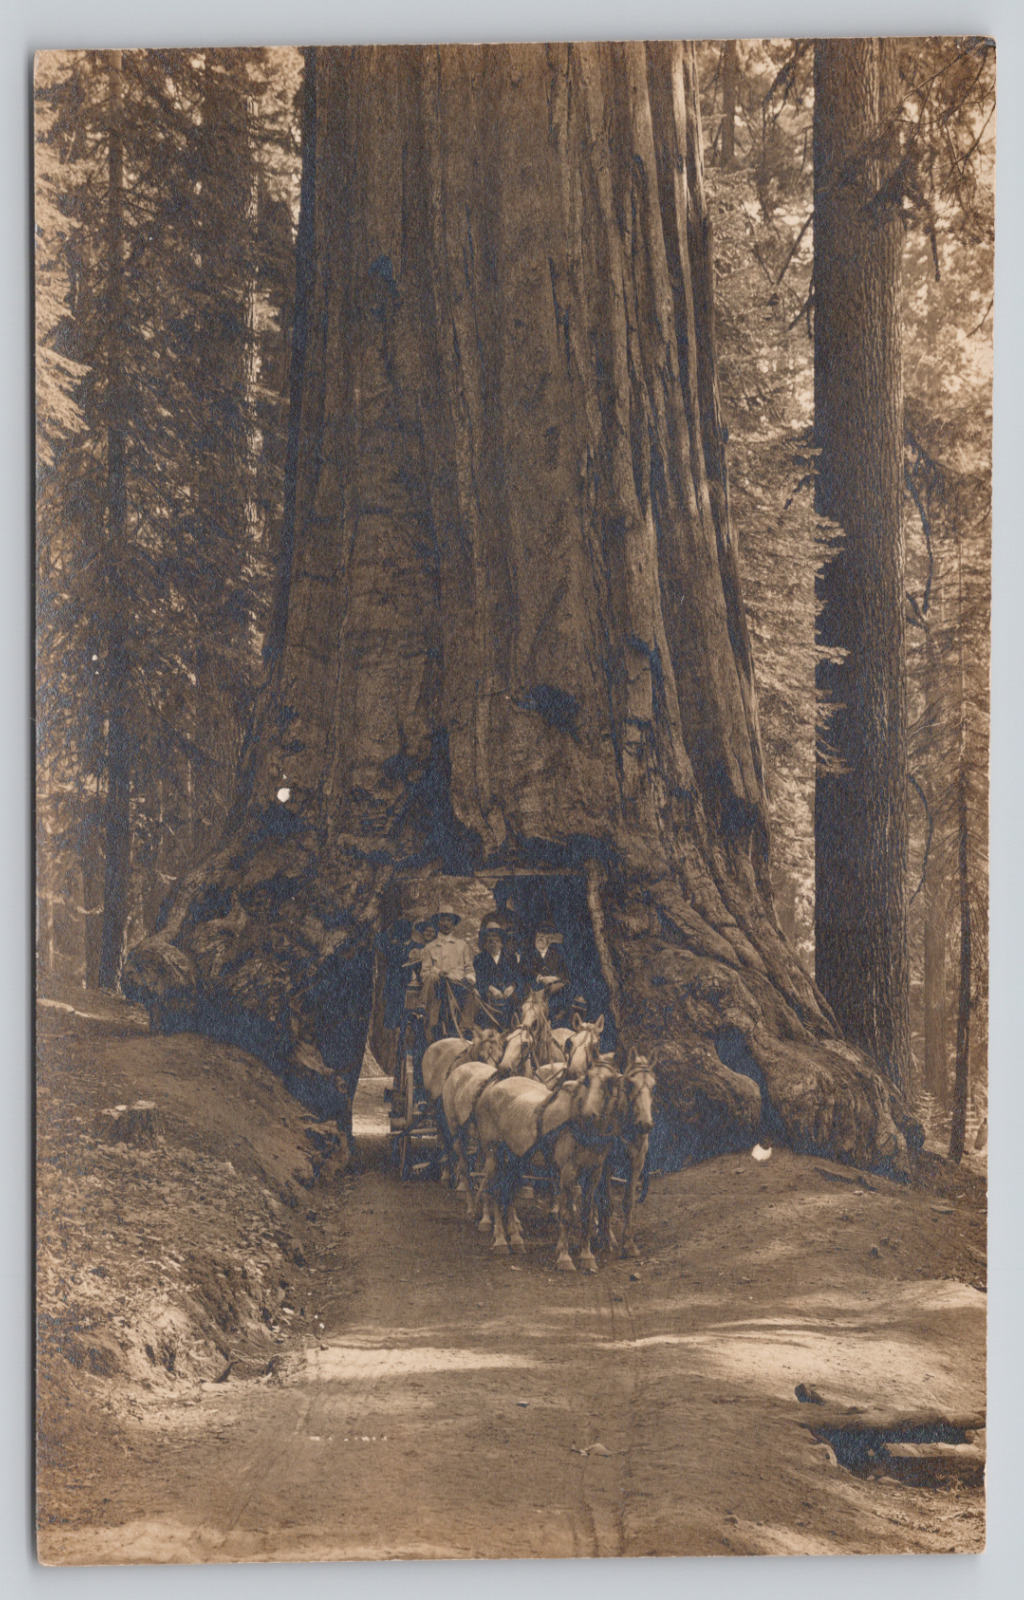 RPPC At Least 5 People and 6 Team Horse Drawn Wagon Through Tree c. 1910 A1058